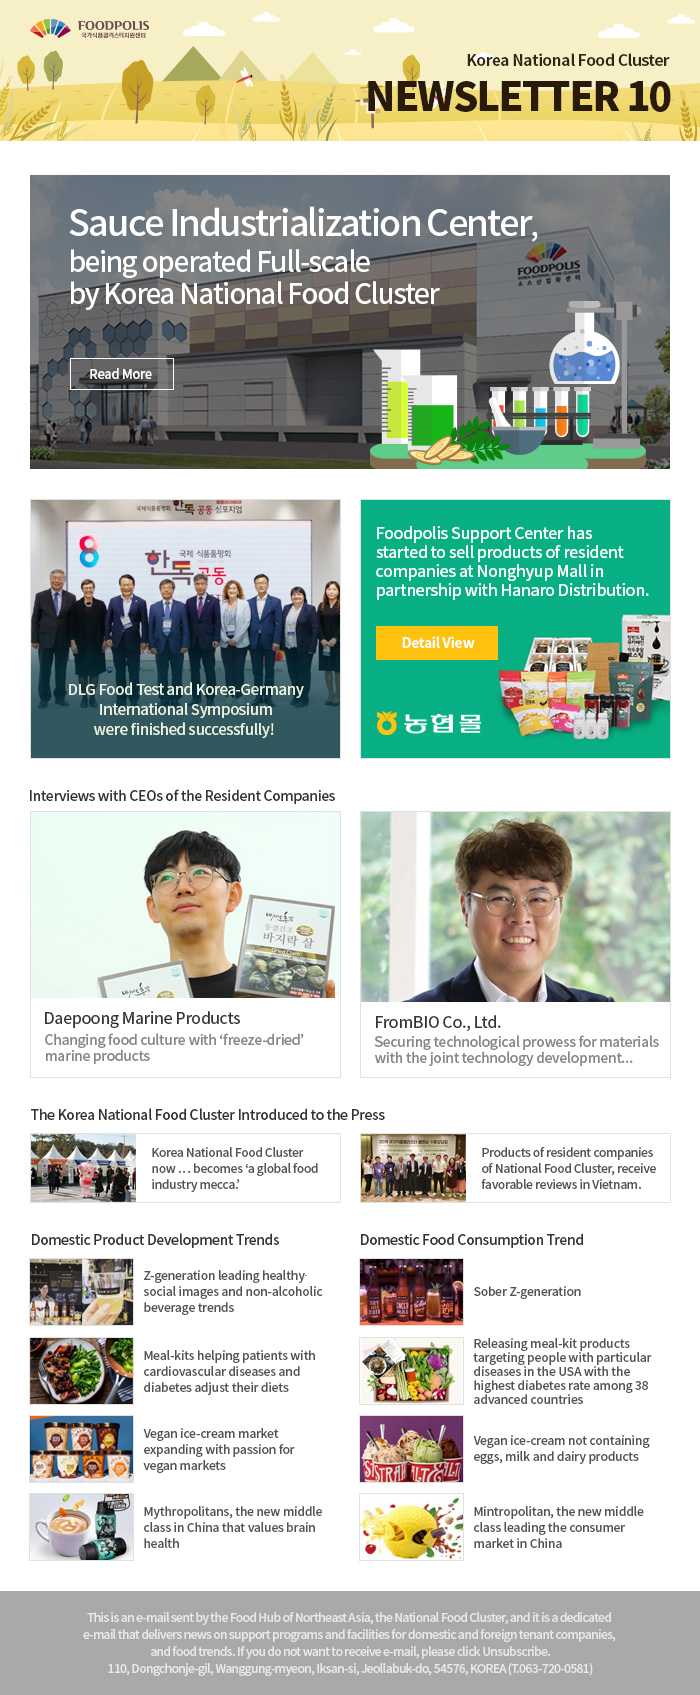 2018 October News Letter from the Korea National Food Cluster